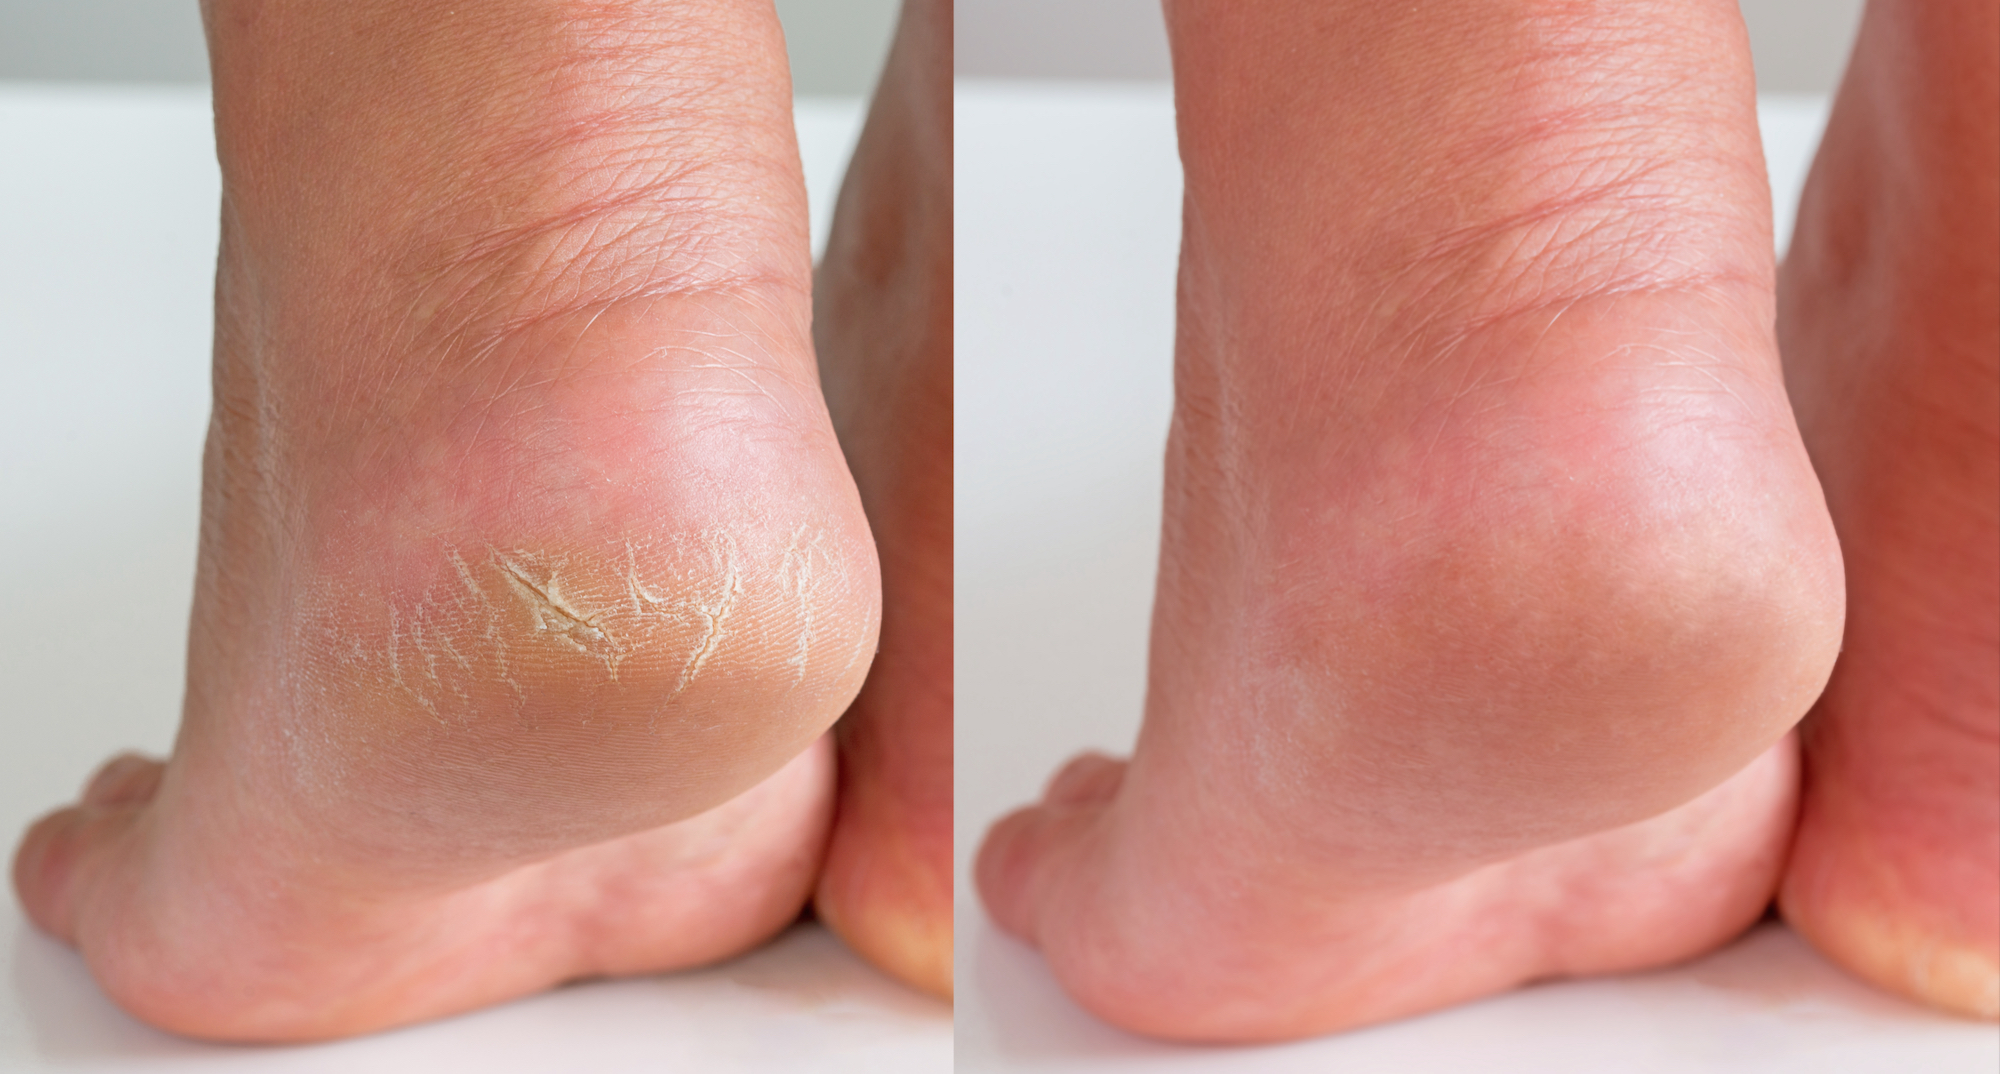 7 Foot Treatments That May Heal Dry and Cracked Skin for Good